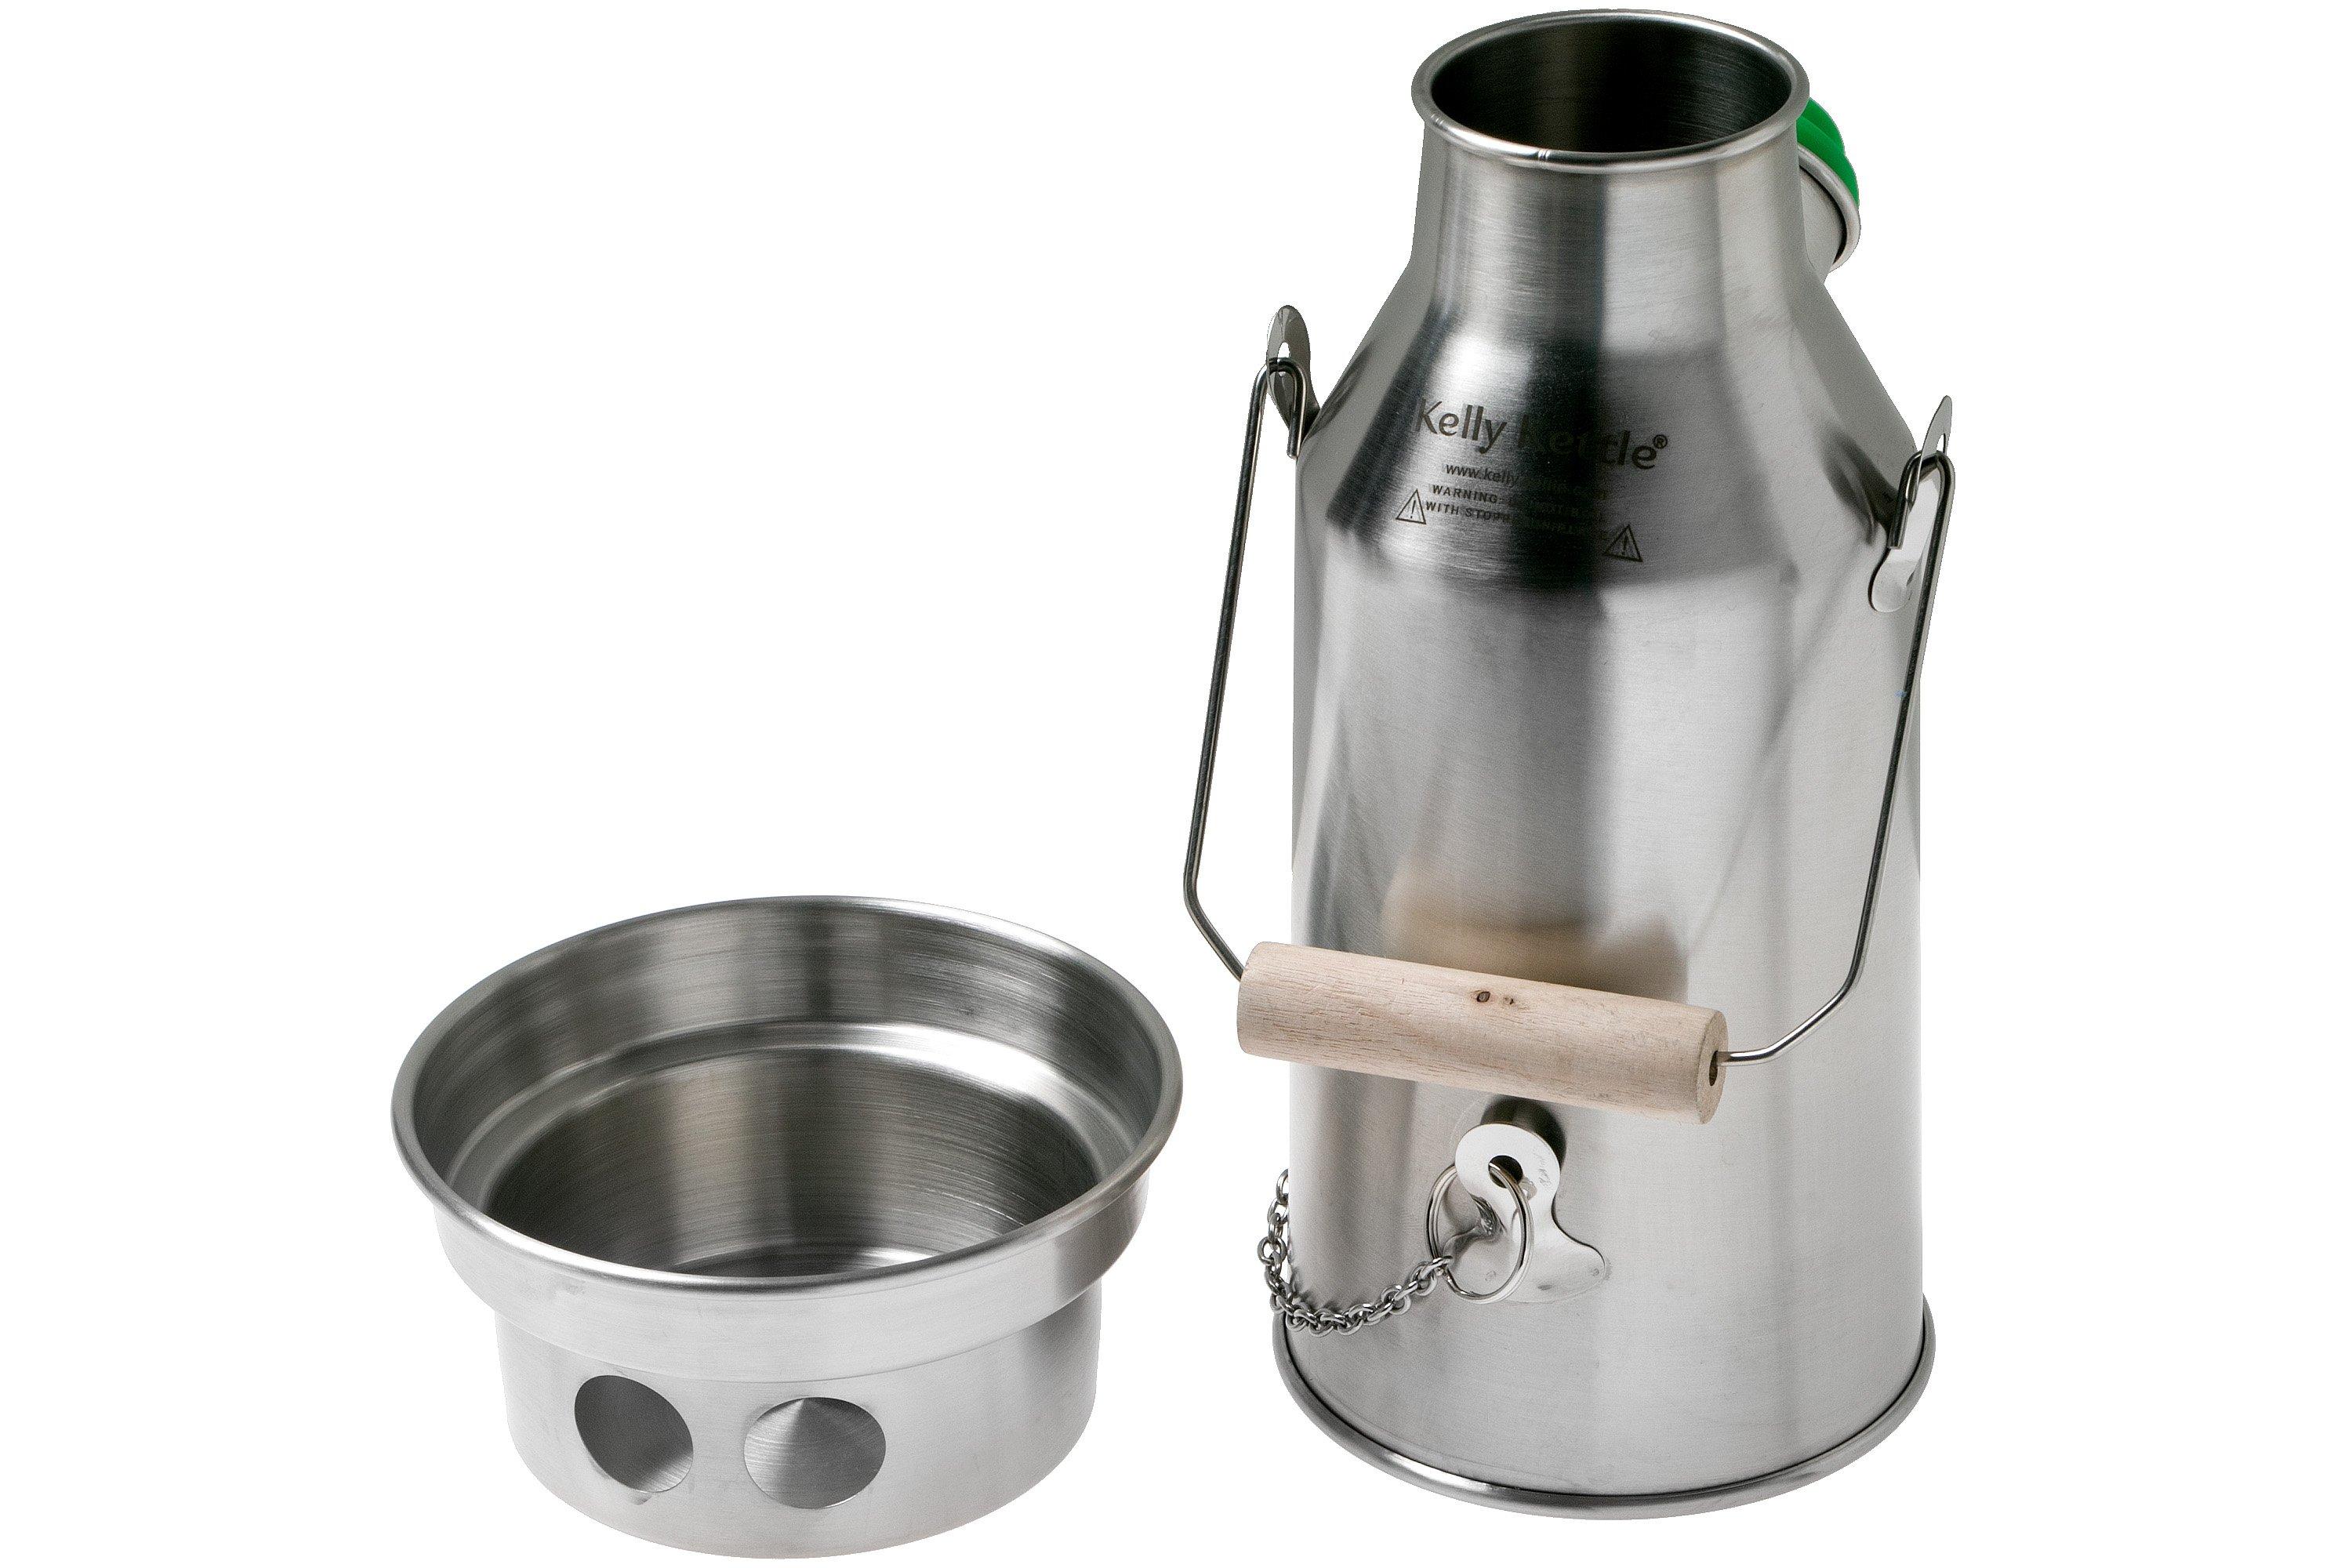 Kelly Kettle Medium Stainless Steel Scout